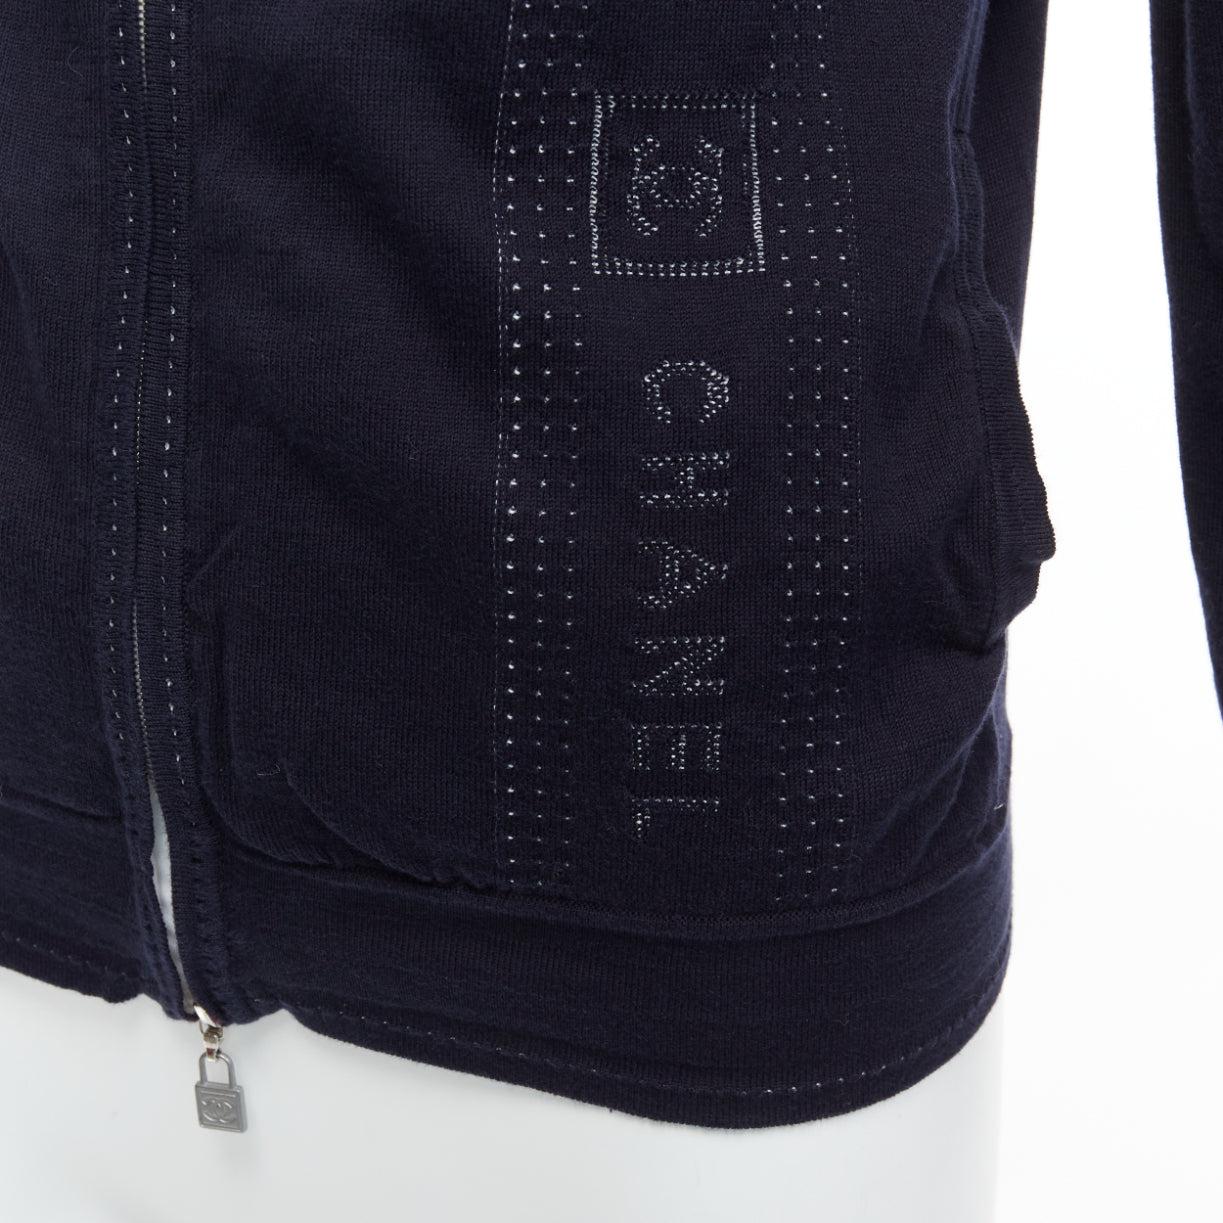 CHANEL Karl Lagerfeld 07c Sports cotton logo trim lock hoodie jacket FR34 XS
Reference: TGAS/D01013
Brand: Chanel
Designer: Karl Lagerfeld
Collection: 07C Sports
Material: Cotton
Color: Navy, White
Pattern: Solid
Closure: Zip
Extra Details: CC logo